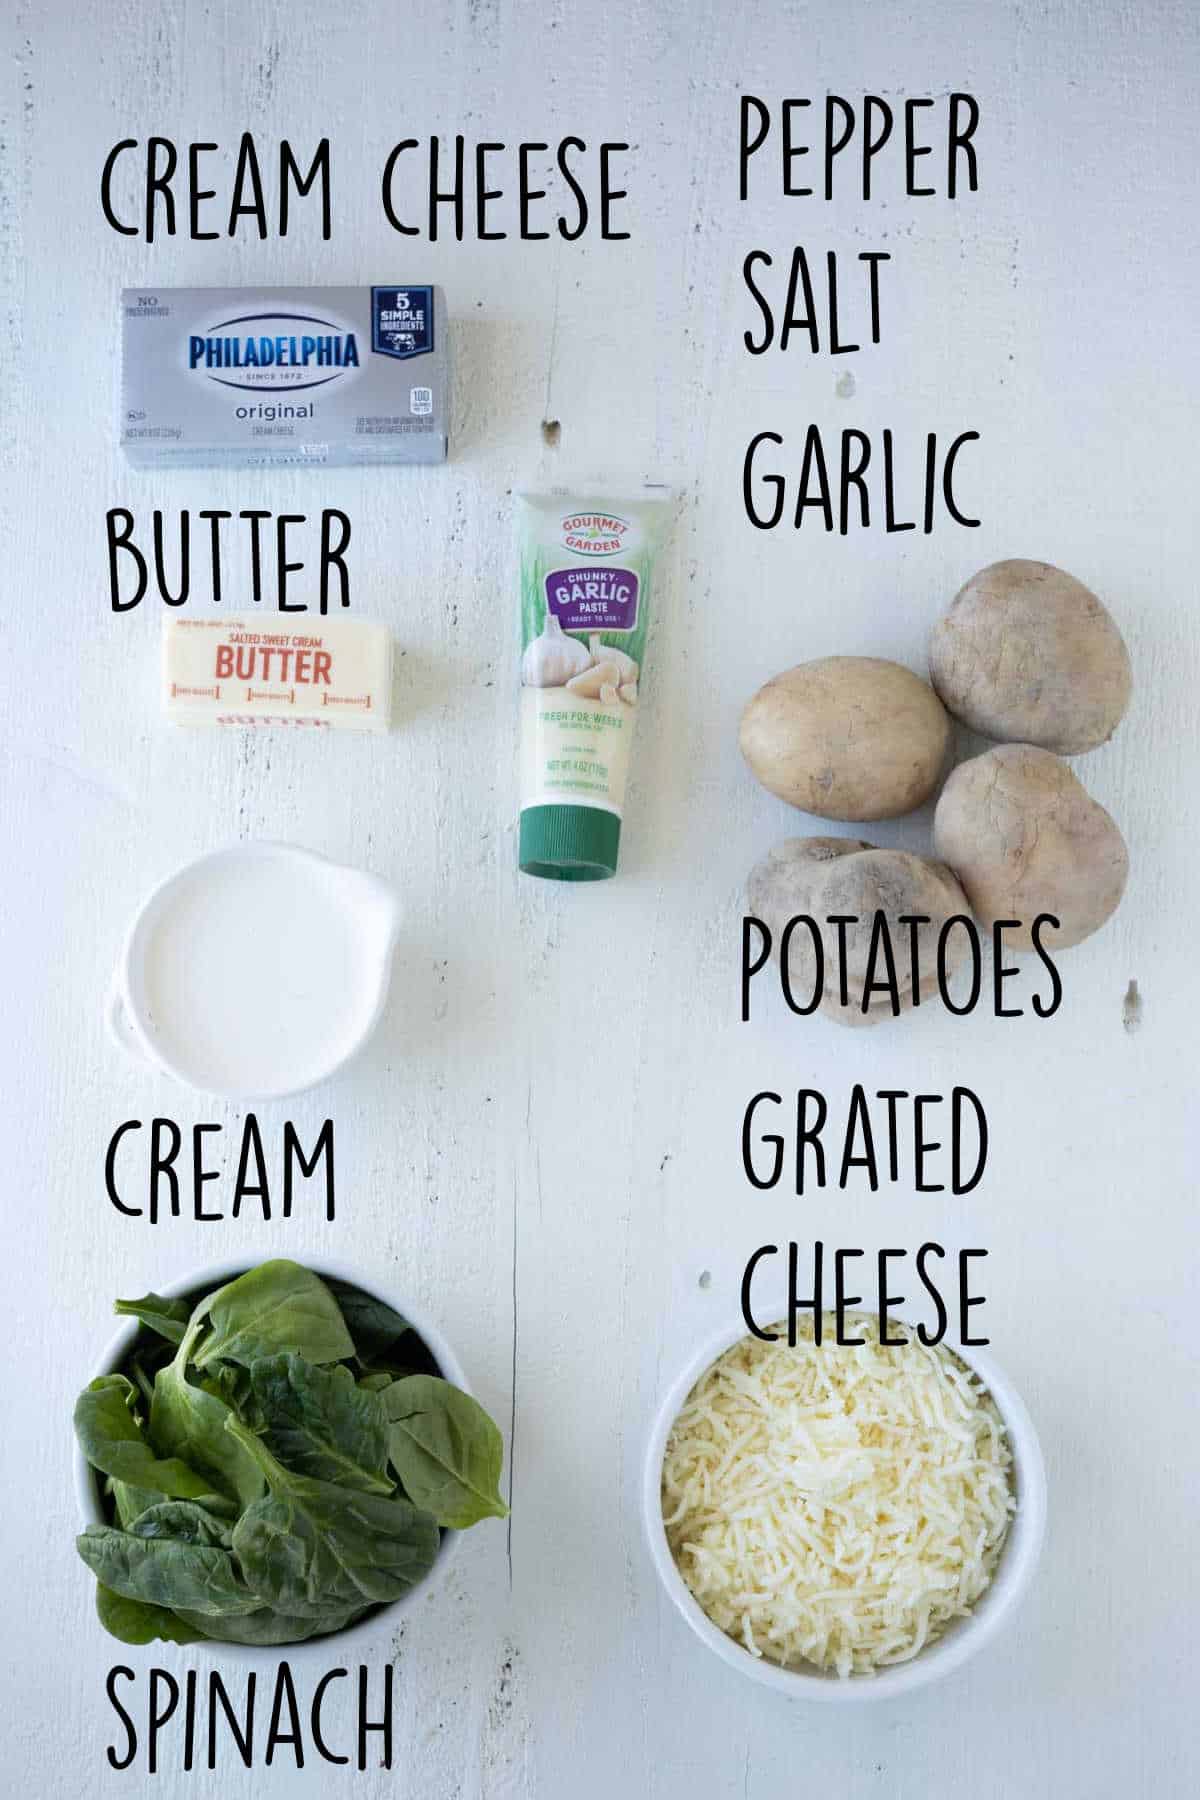 An image with ingredients needed to make mashed potatoes and spinach.